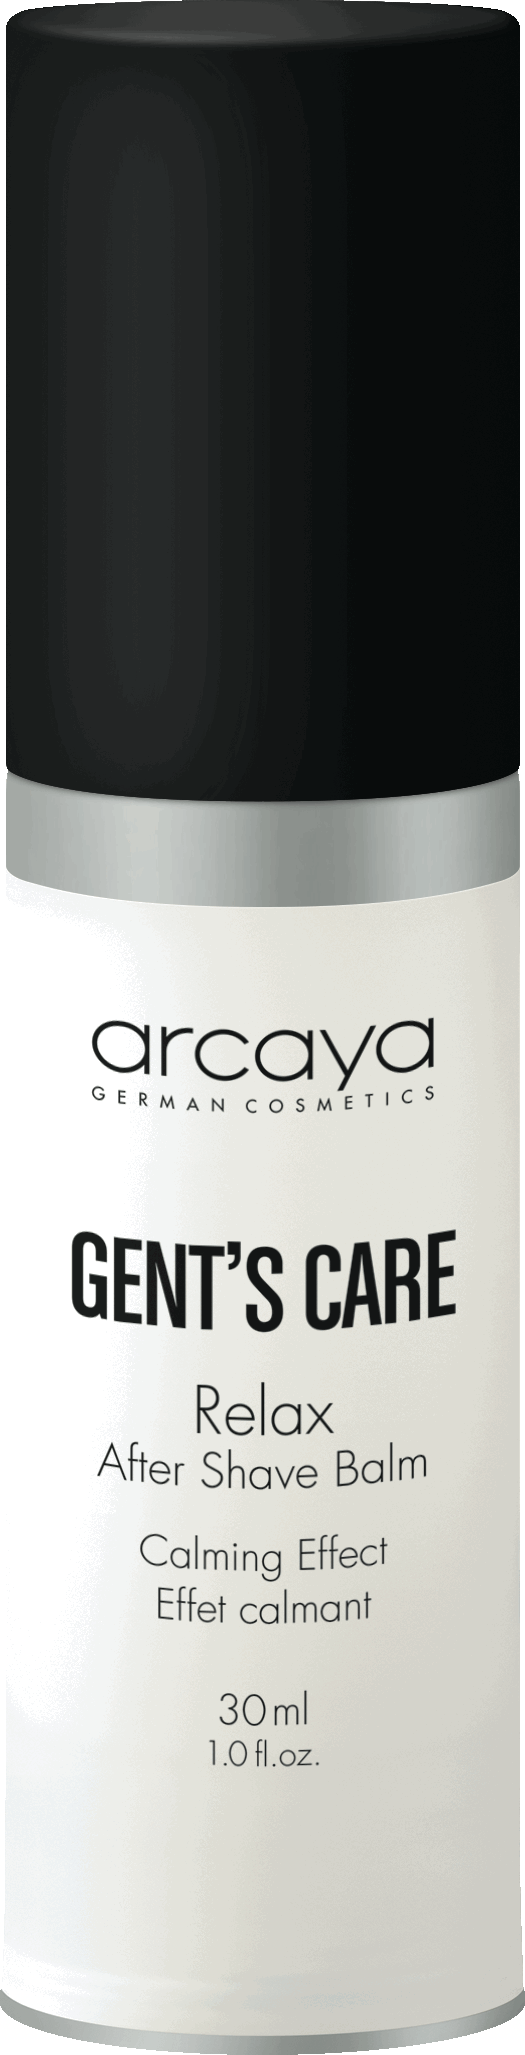 Gent's Care Relax After Shave Balm